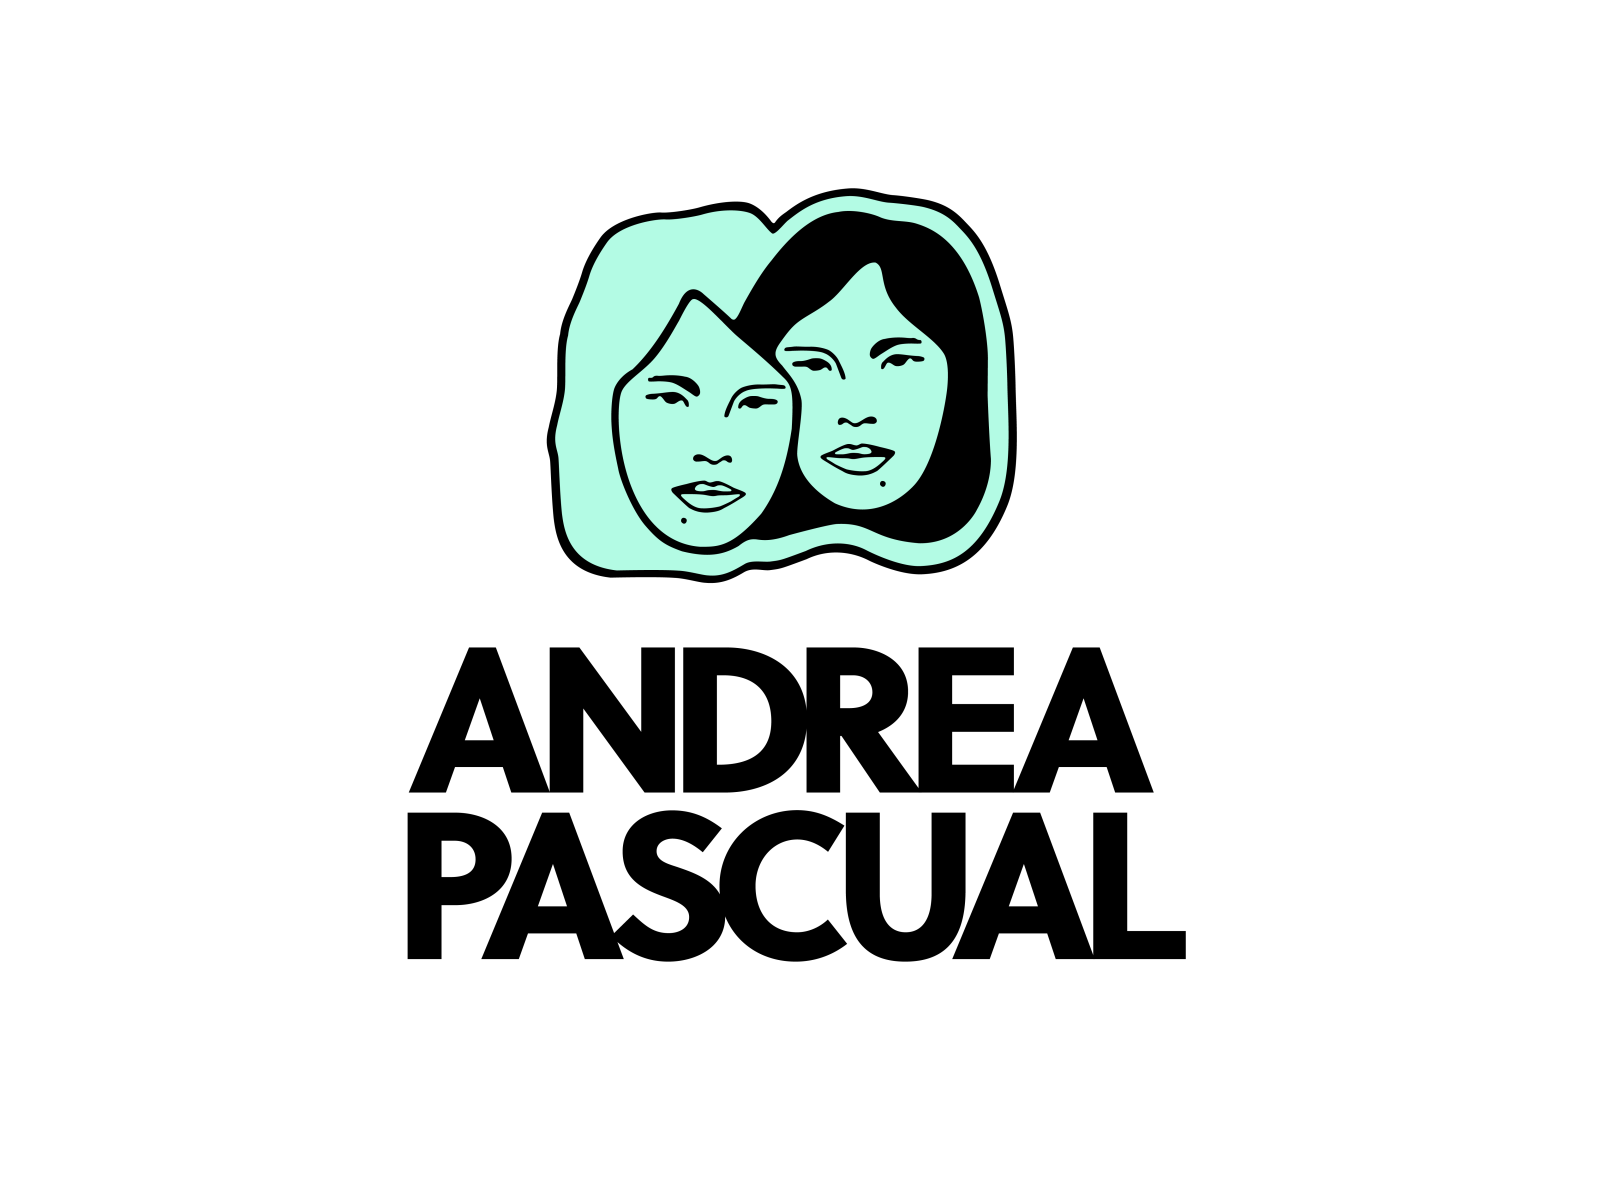 ANDREA PASCUAL - EMBLEM + WORDMARK by Andrea Pascual on Dribbble